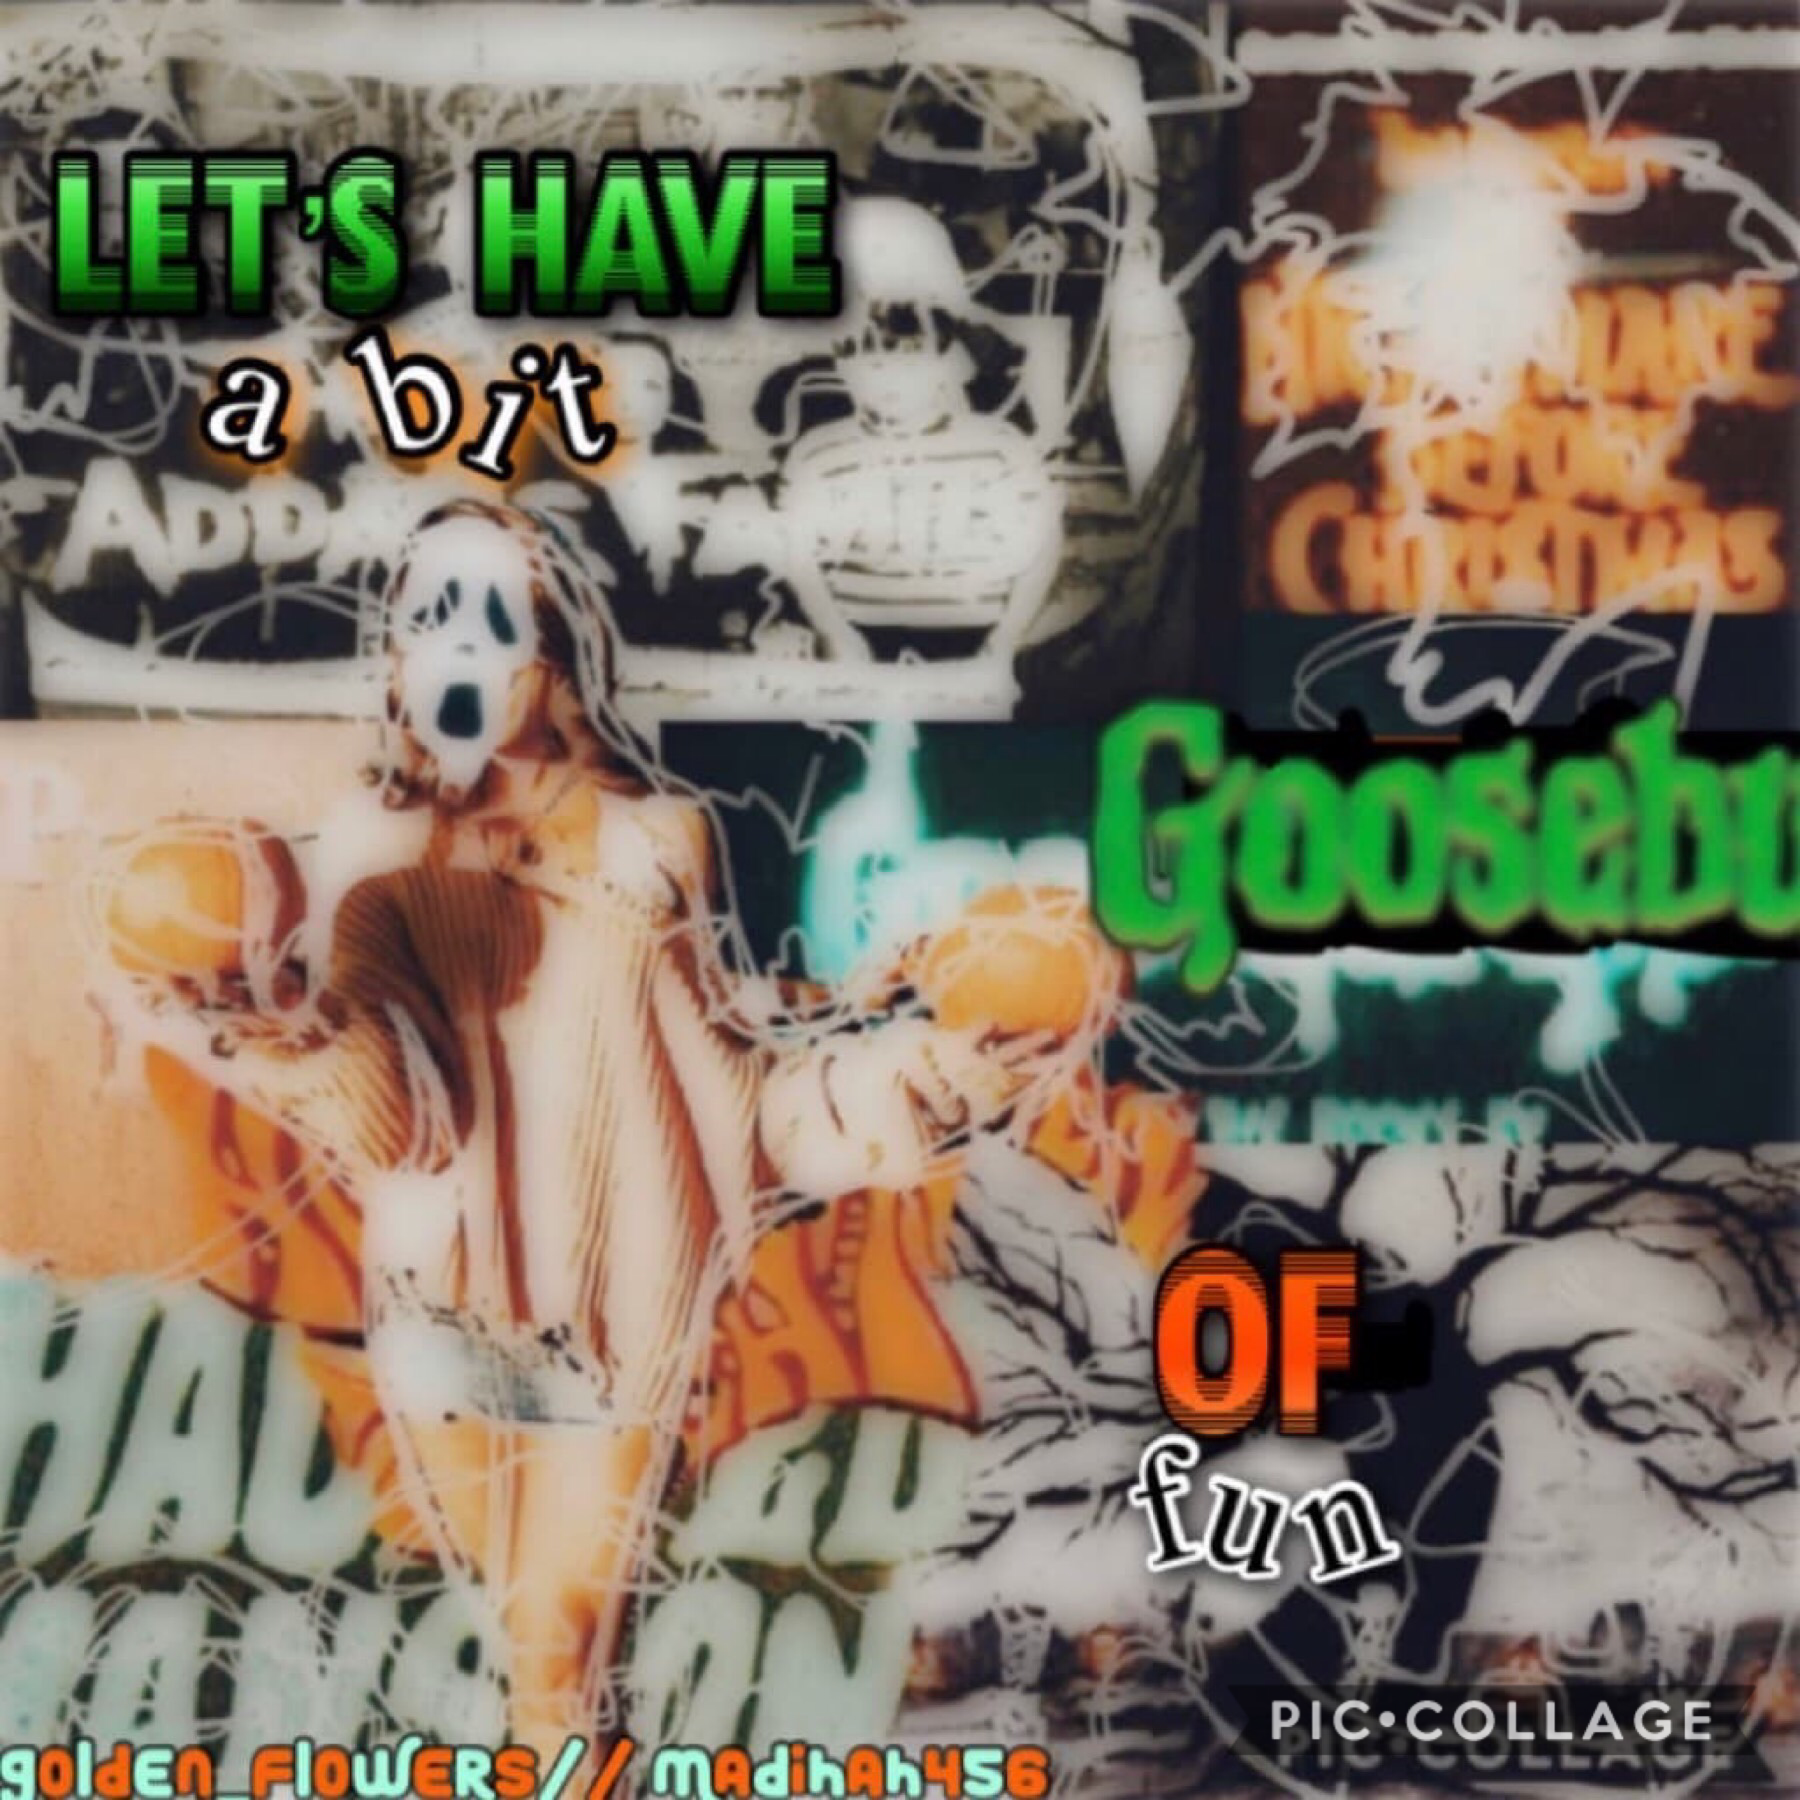 {🎃tap for collab🎃}
Collab with Madihah456!
I loved collabing with you❤️go check out her account!
••••••••••••••••••••••••••••••••
qotd:favorite halloween movie?
aotd:halloween, friday the 13th, or the nightmare before christmas:)